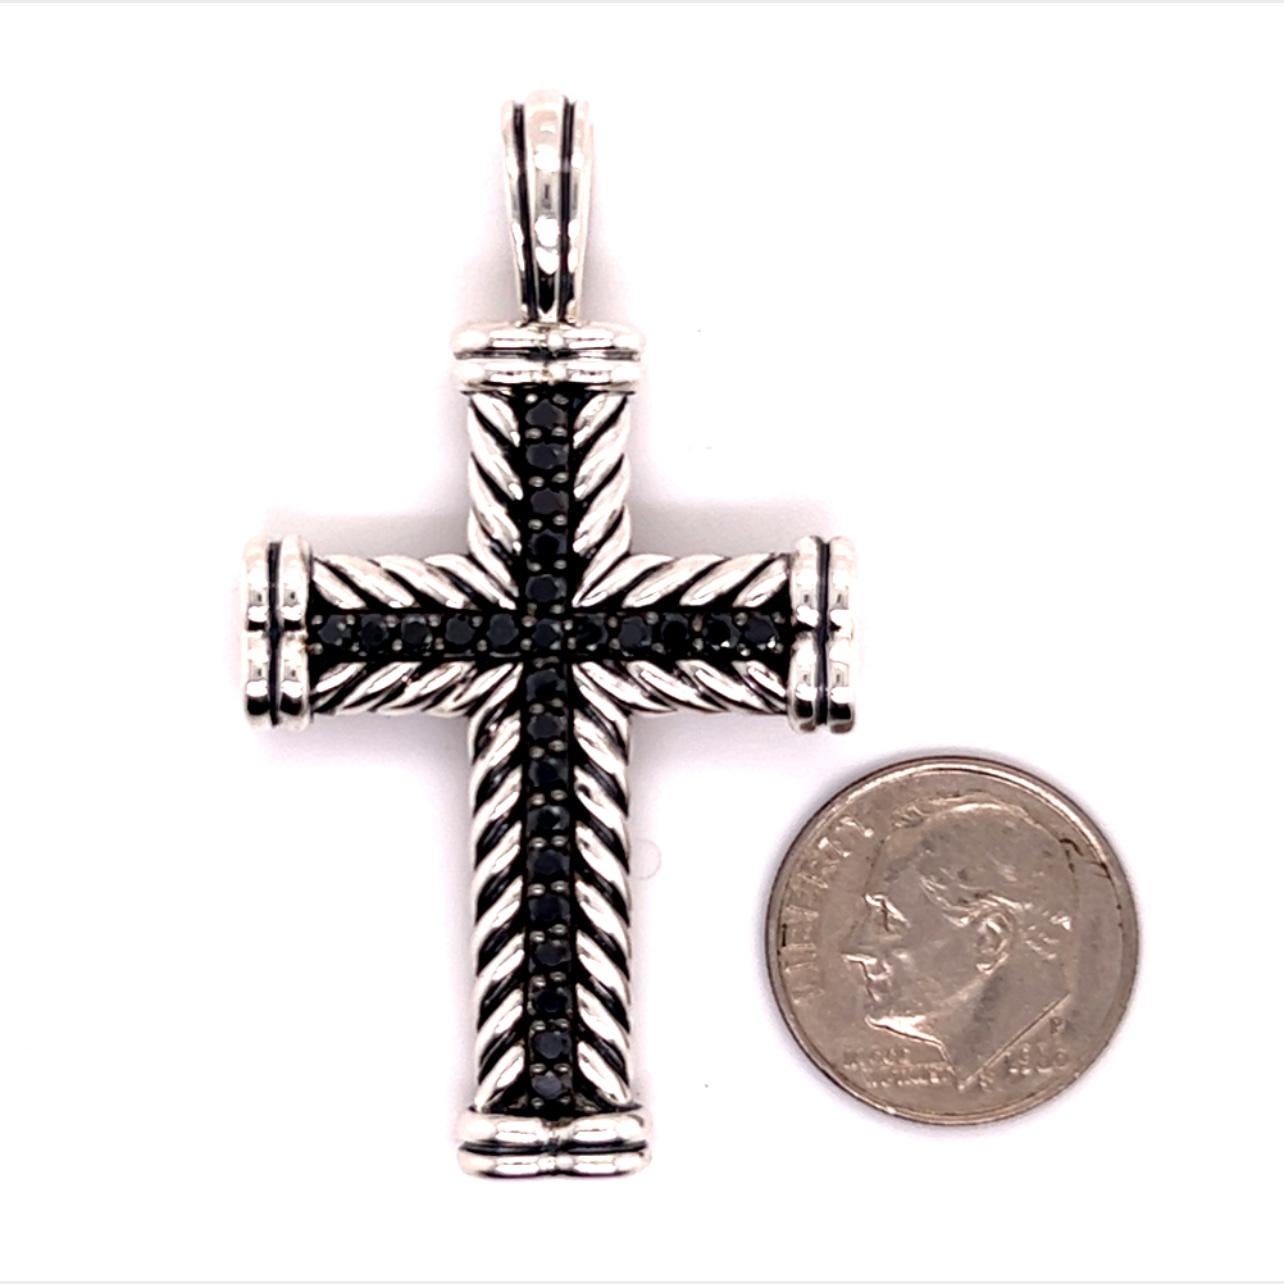 David Yurman Estate Black Diamond Chevron Silver Cross Pendant 16.5g DY434

Retails $999.00

This elegant Authentic David Yurman cross pendant is made of sterling silver and has a weight of 16.5 grams.

TRUSTED SELLER SINCE 2002

PLEASE SEE OUR